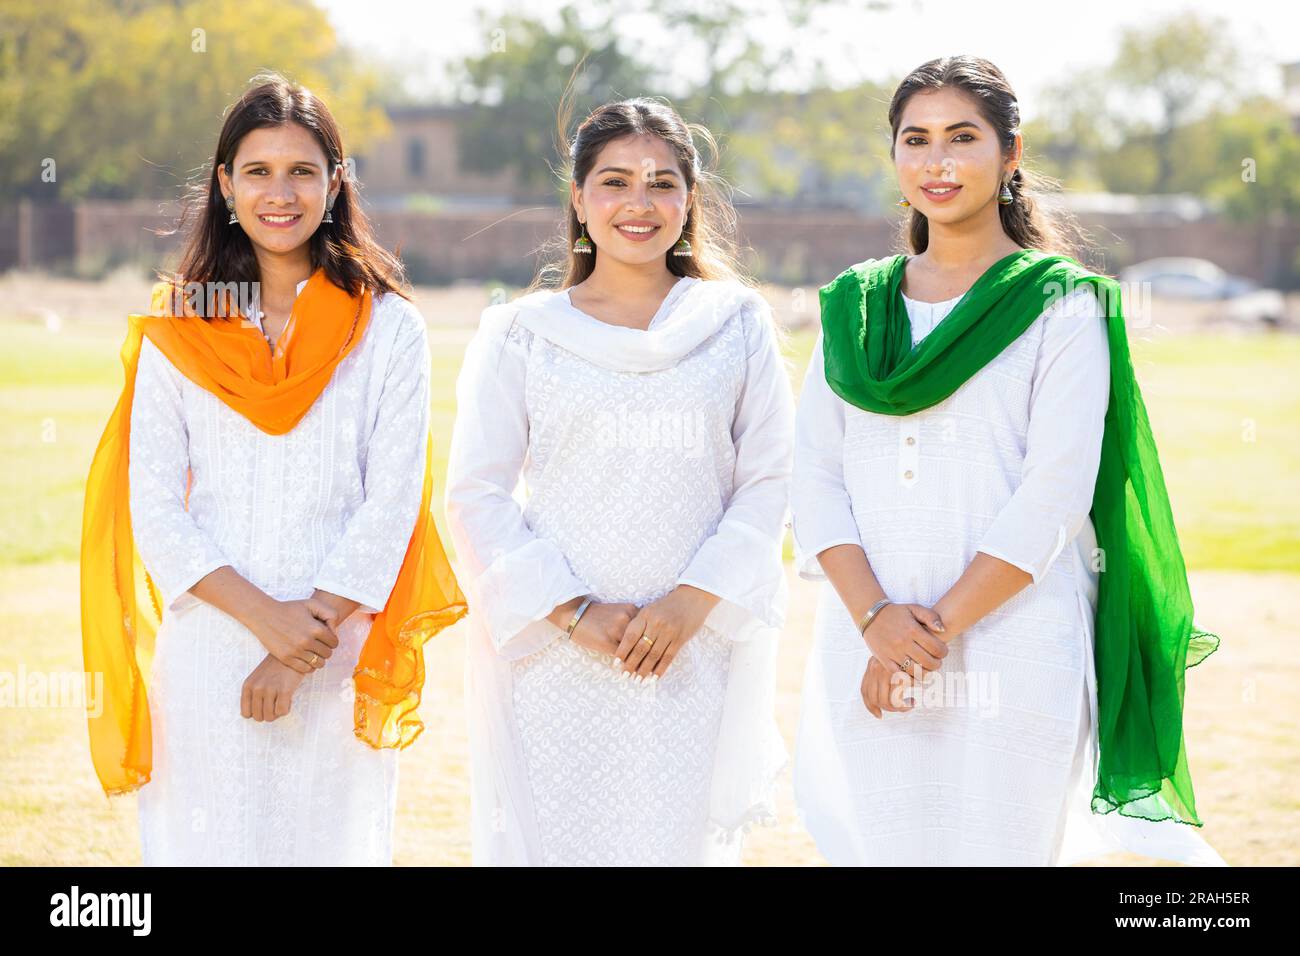 Independence Day Dress Photos and Images & Pictures | Shutterstock